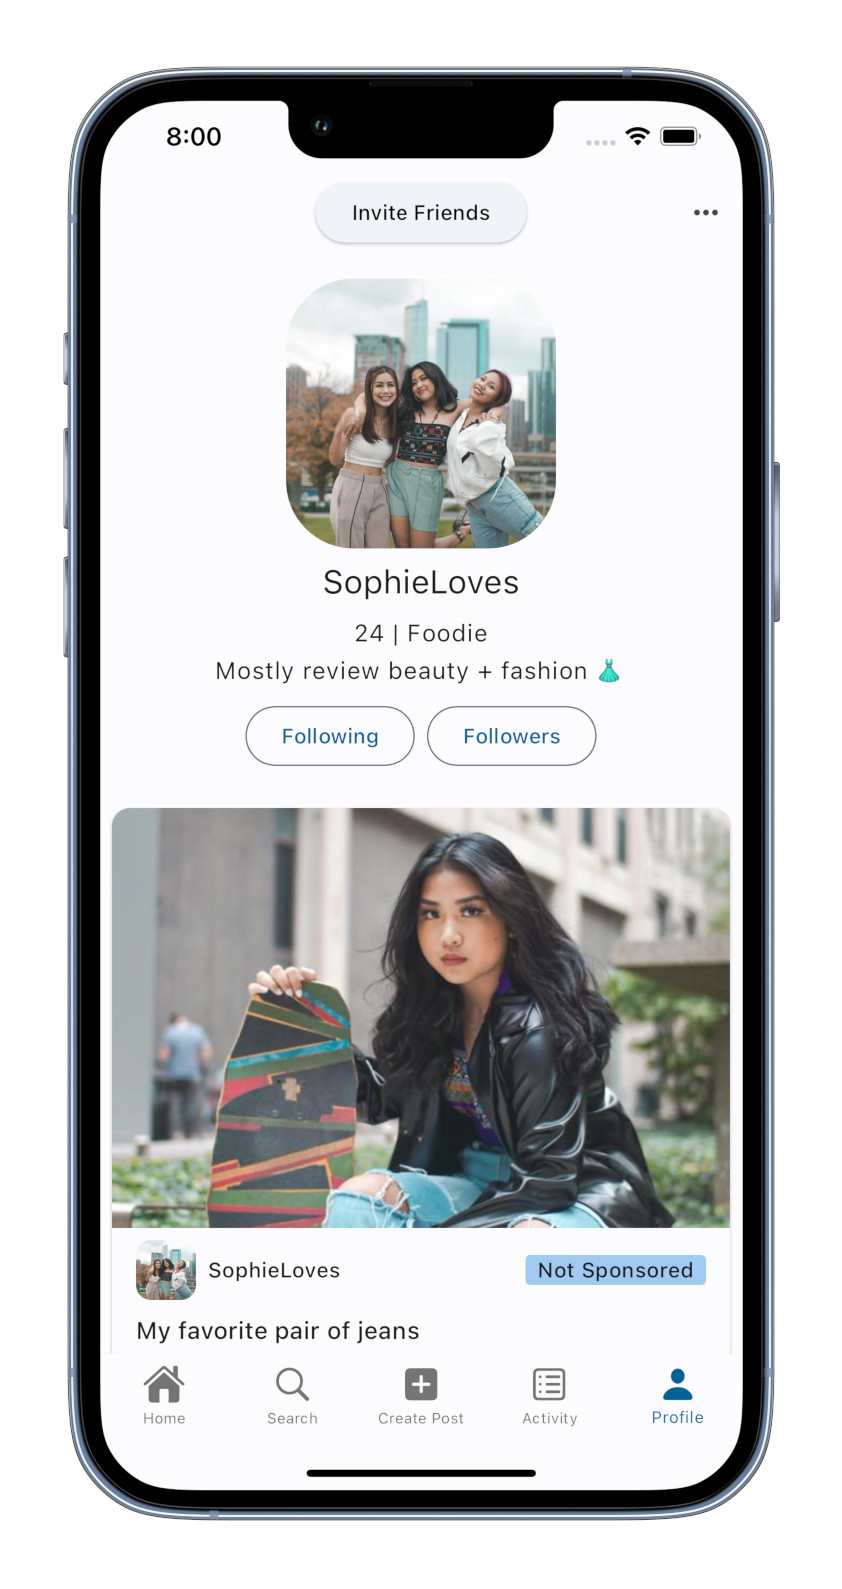 Screenshot of the Pikelane app profile page for SophieLoves with a photo of her with friends, a description '24 | Foodie, Mostly review beauty + fashion' and her newest post 'My favorite pair of jeans'.